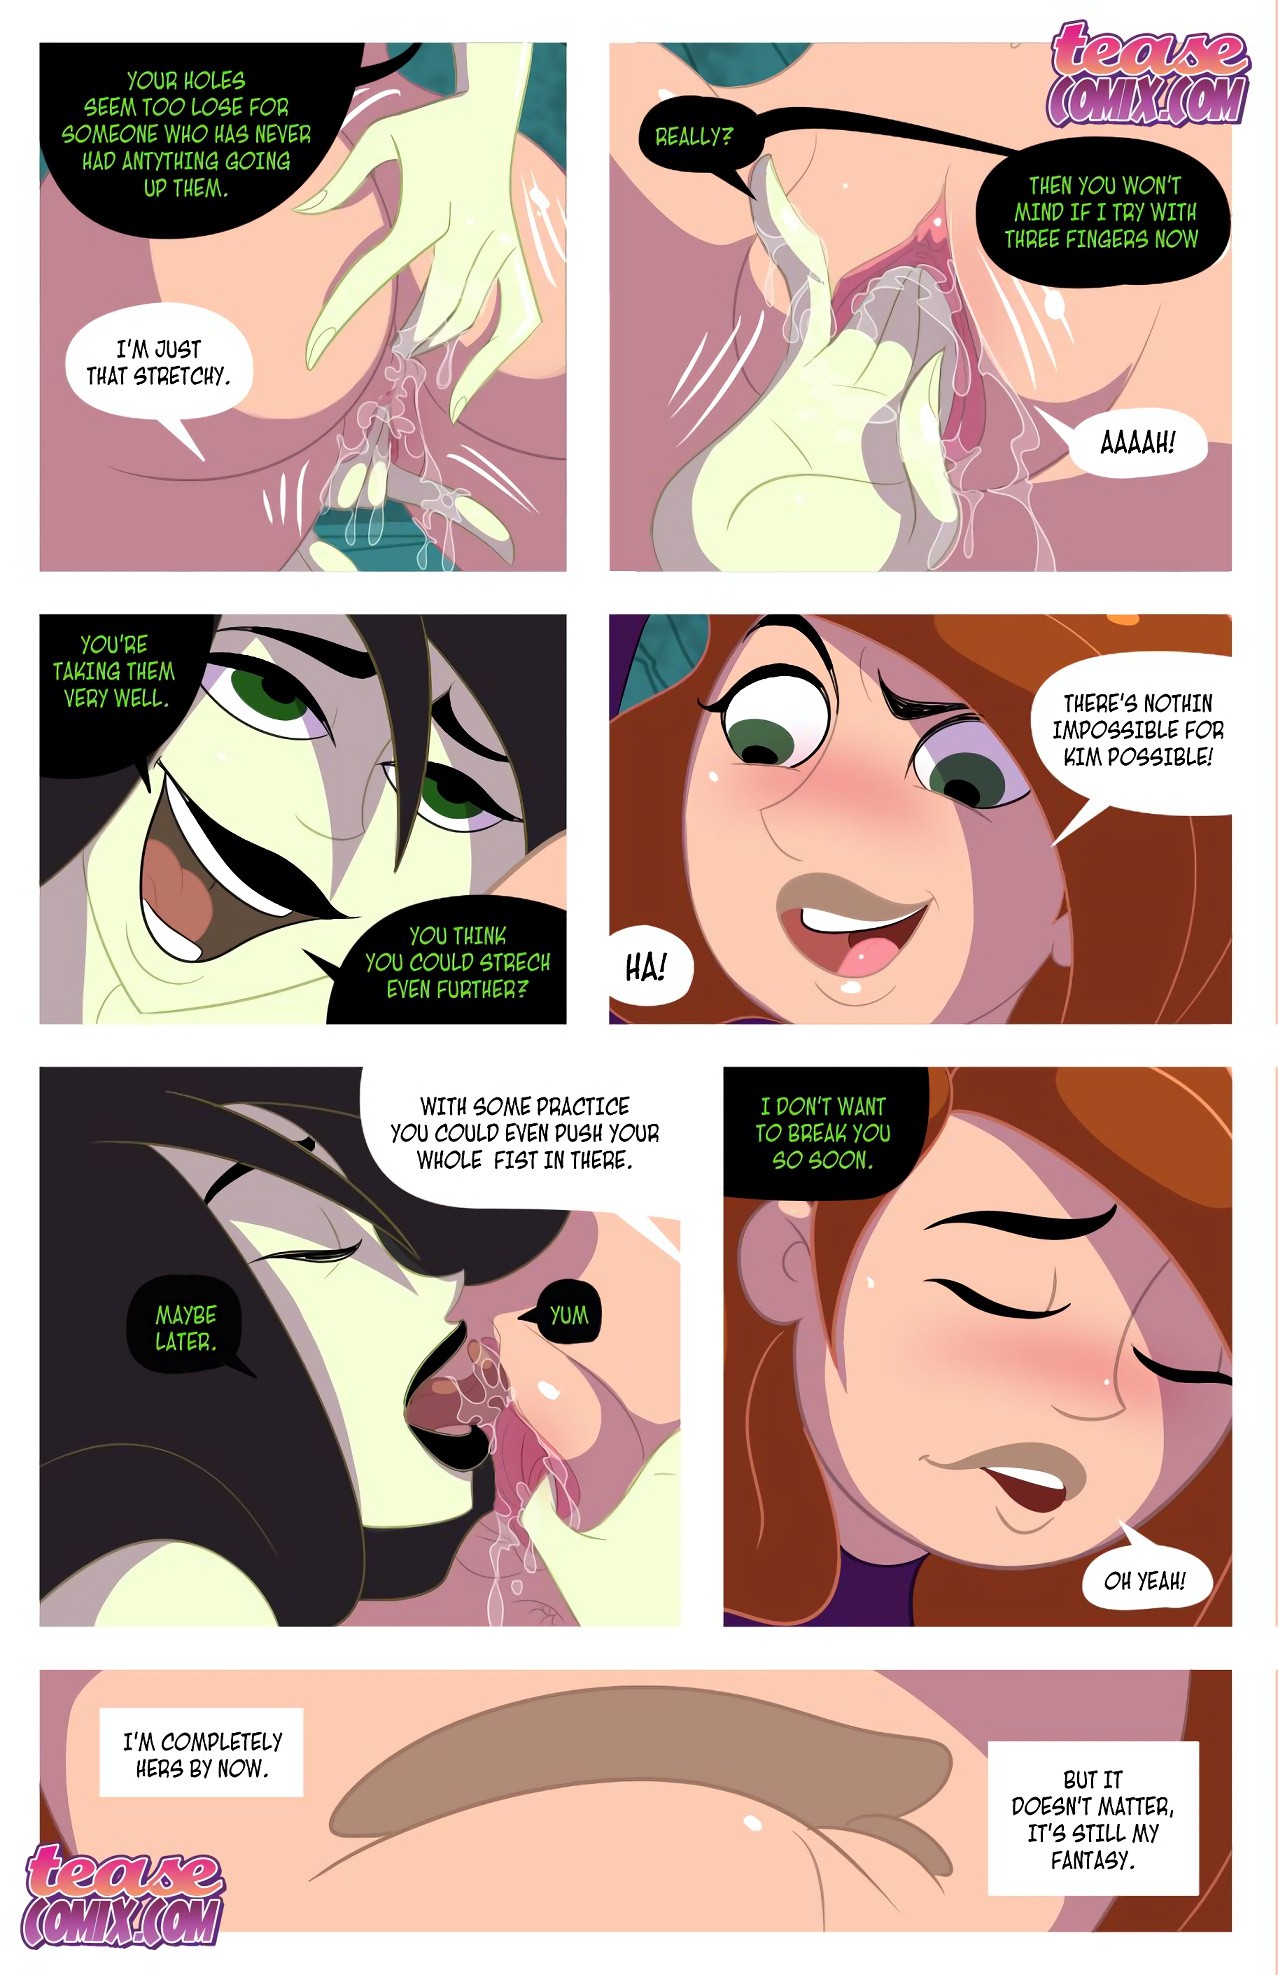 Kinky Possible - A Villain's Bitch Remastered porn comic picture 16